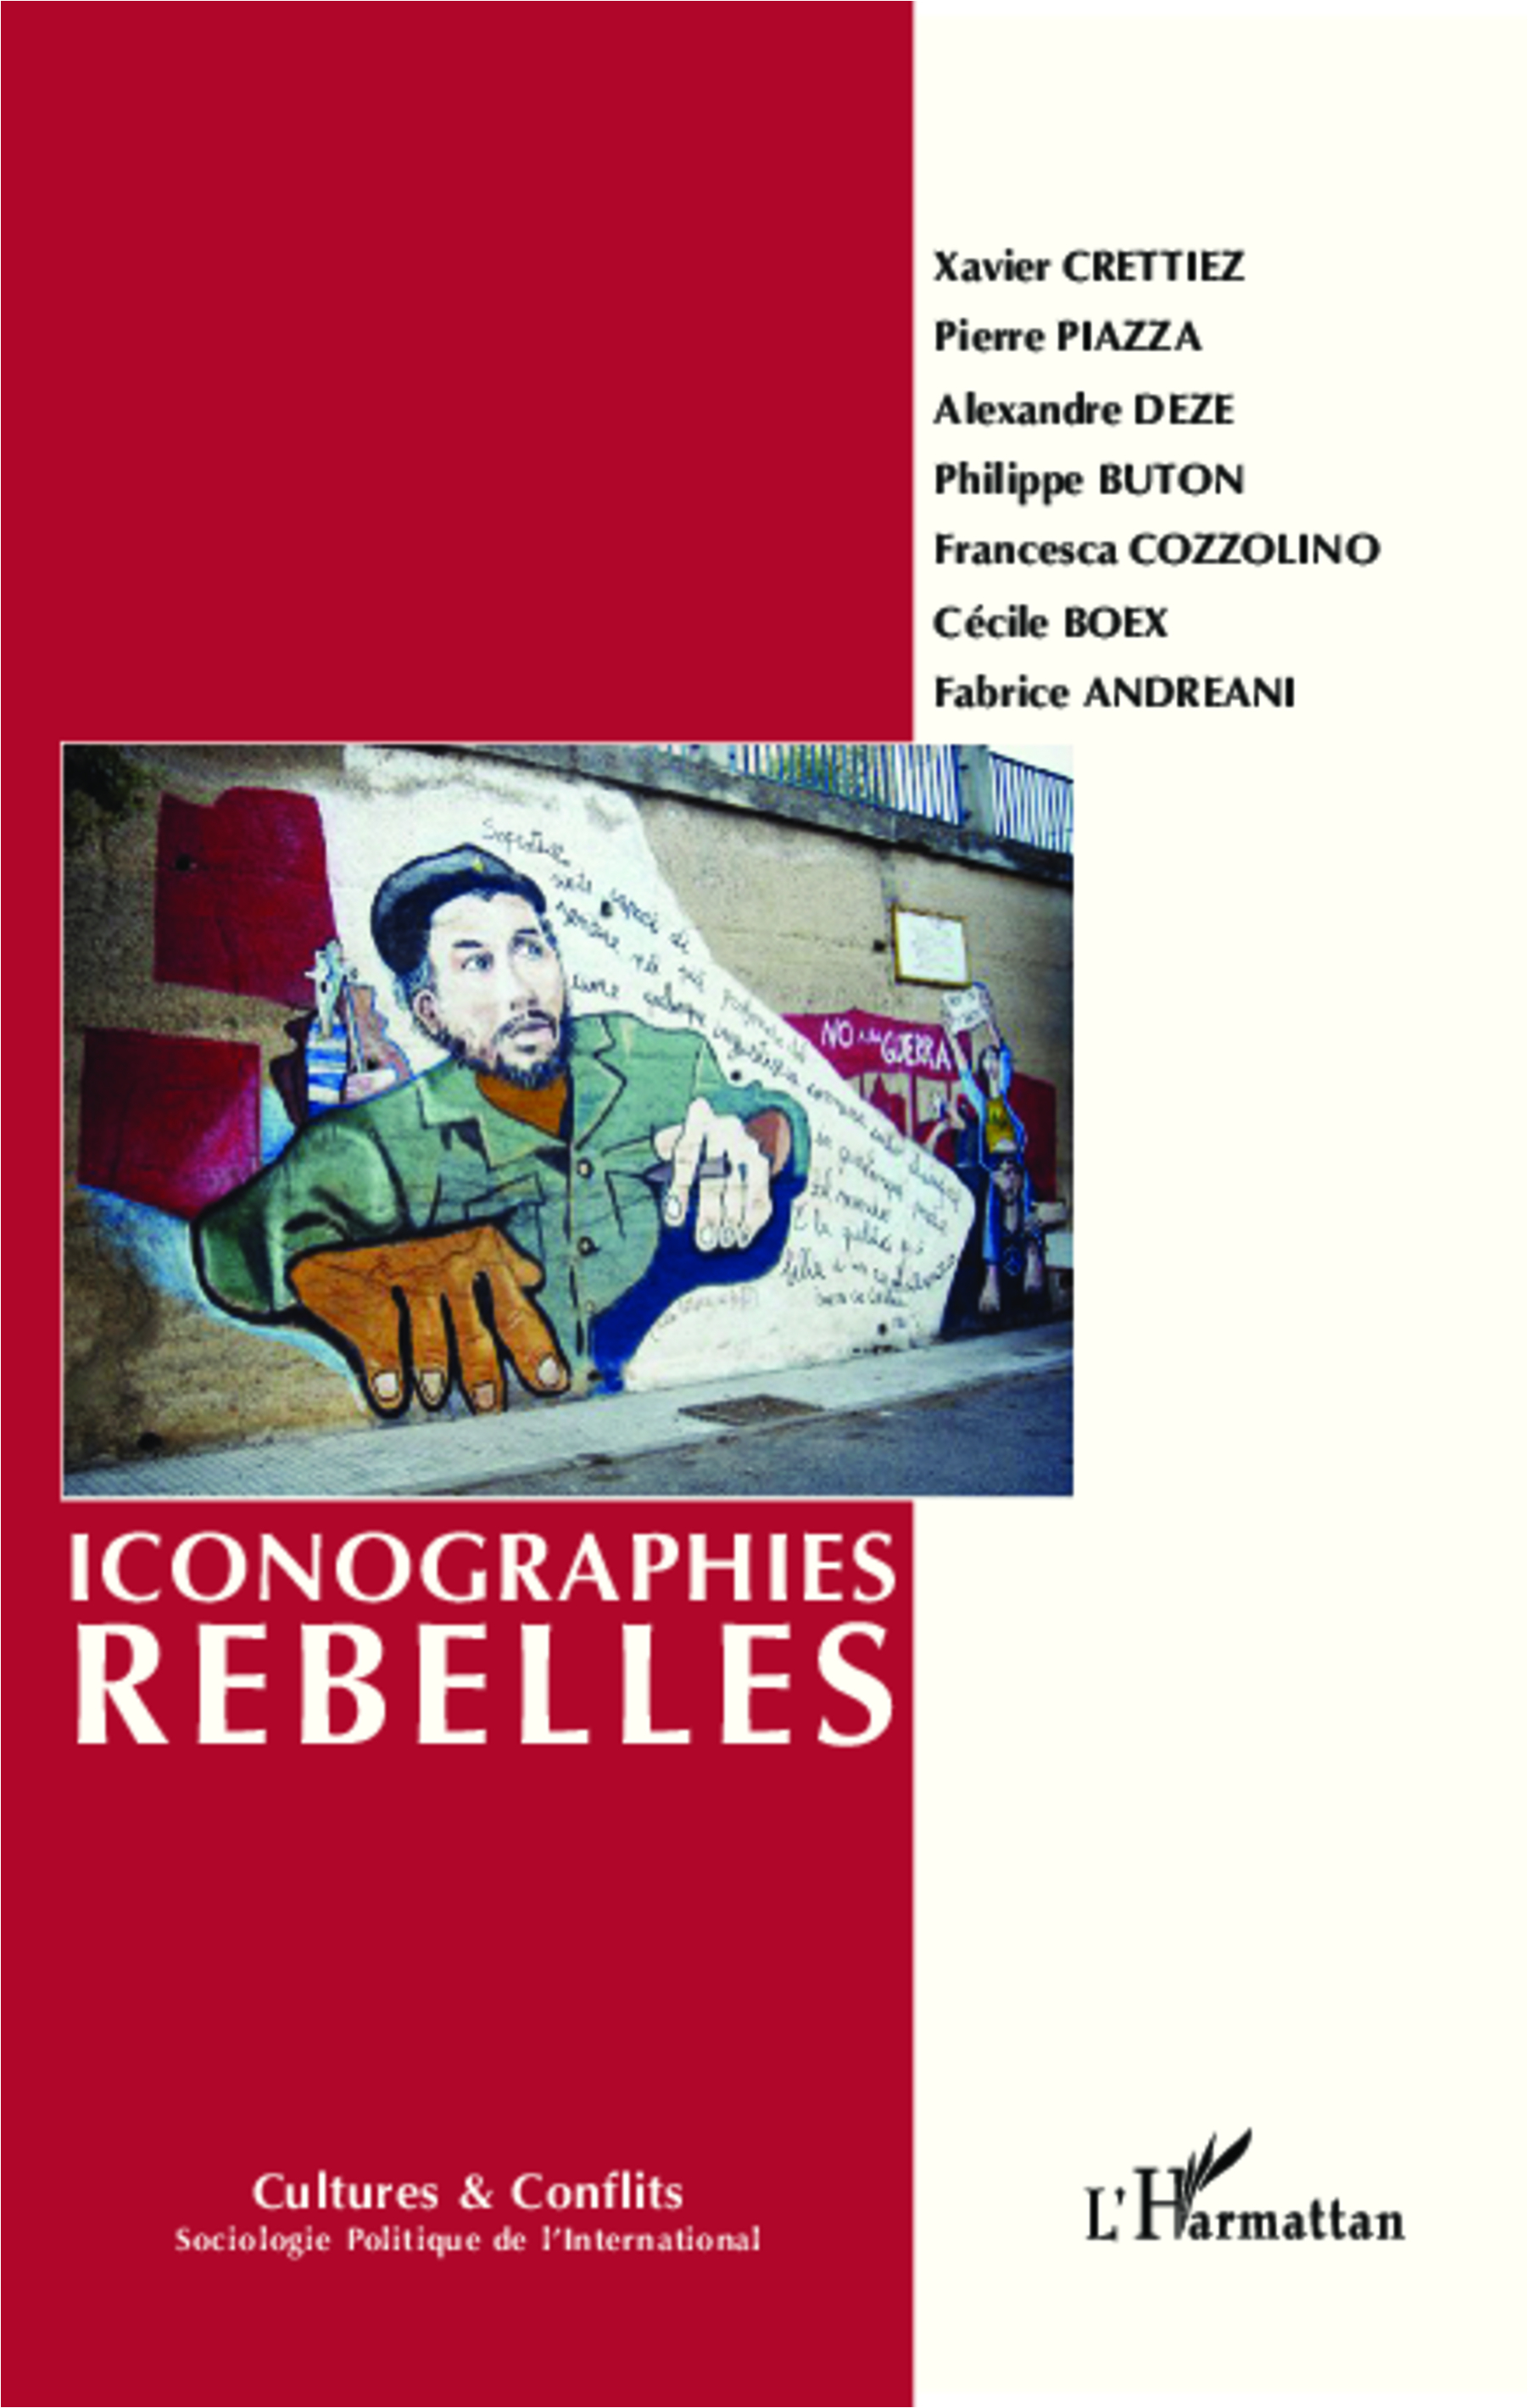 Cultures et Conflits, Iconographies rebelles (9782343026183-front-cover)